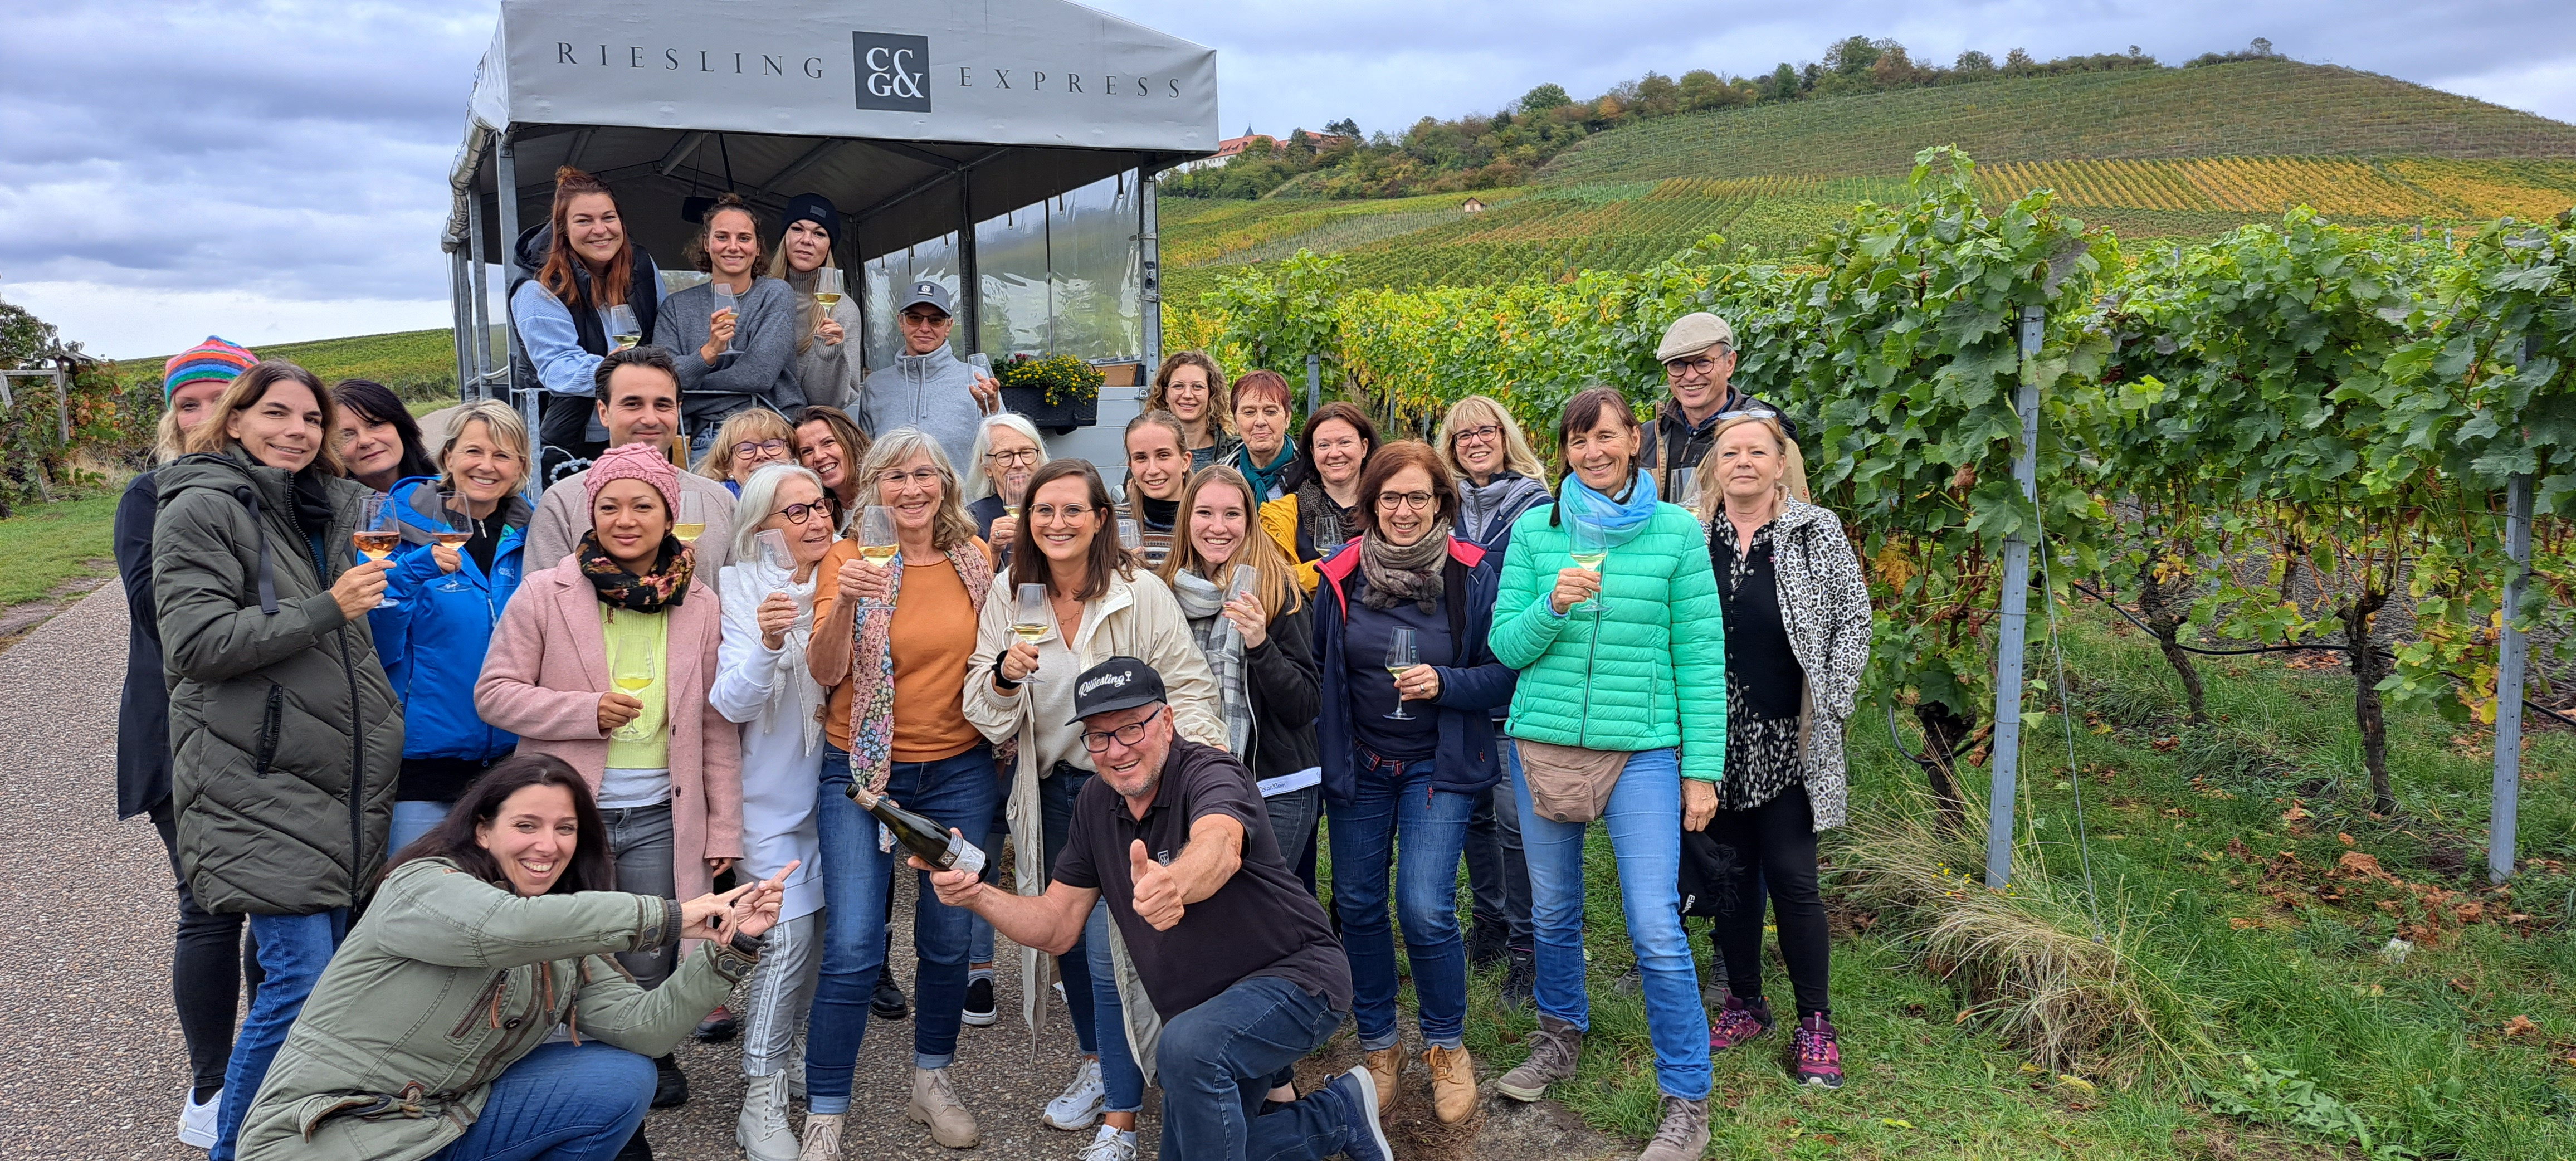 DSGVO Z Cleebronn Riesling Express Gruppe 2